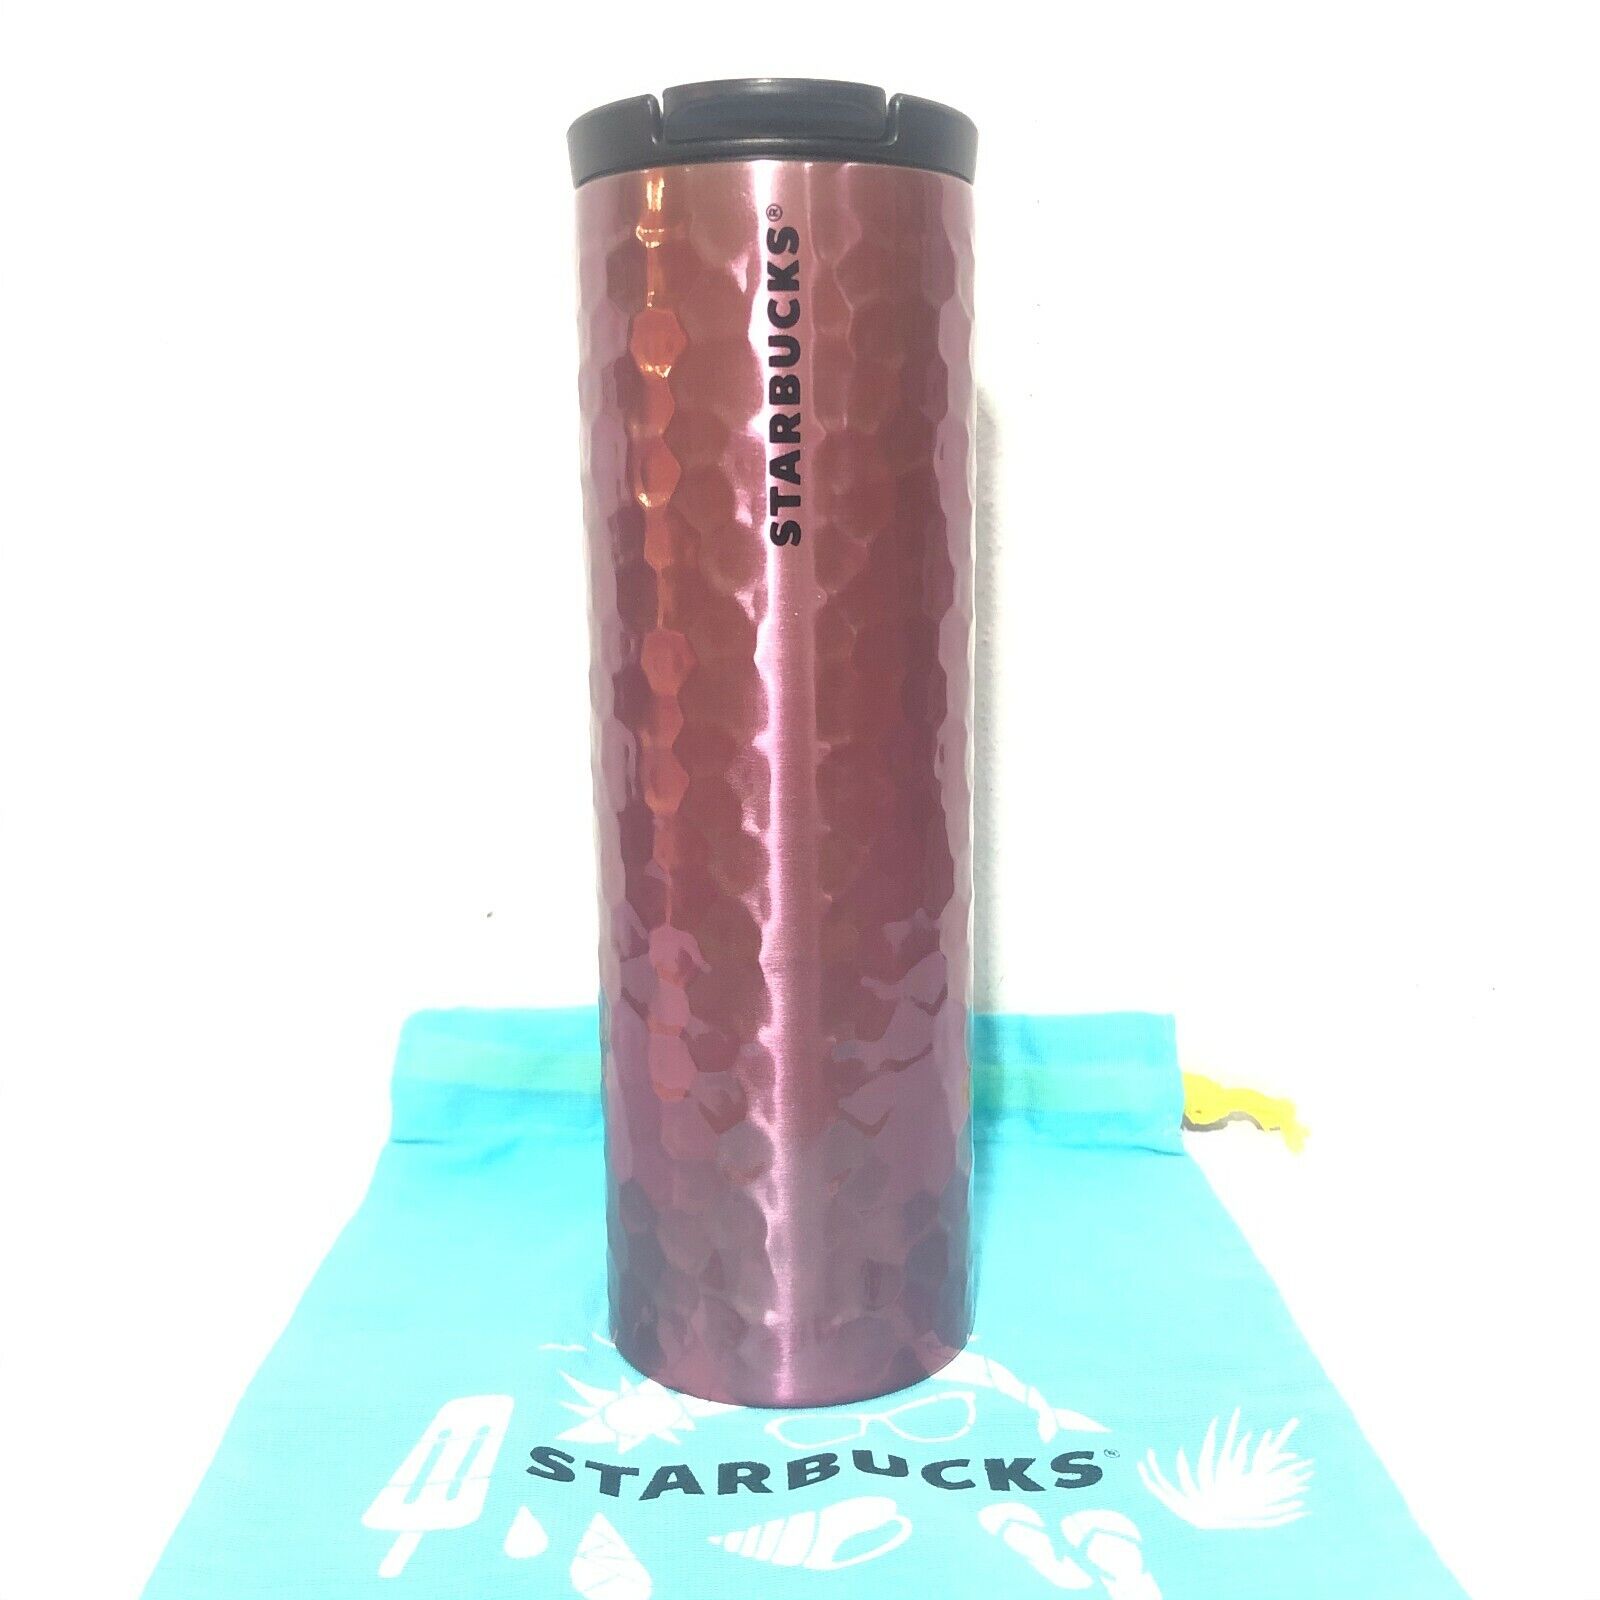 Starbucks Stainless steel Tumbler Troy 16oz.Pink Hammer 2018 Limited Edition